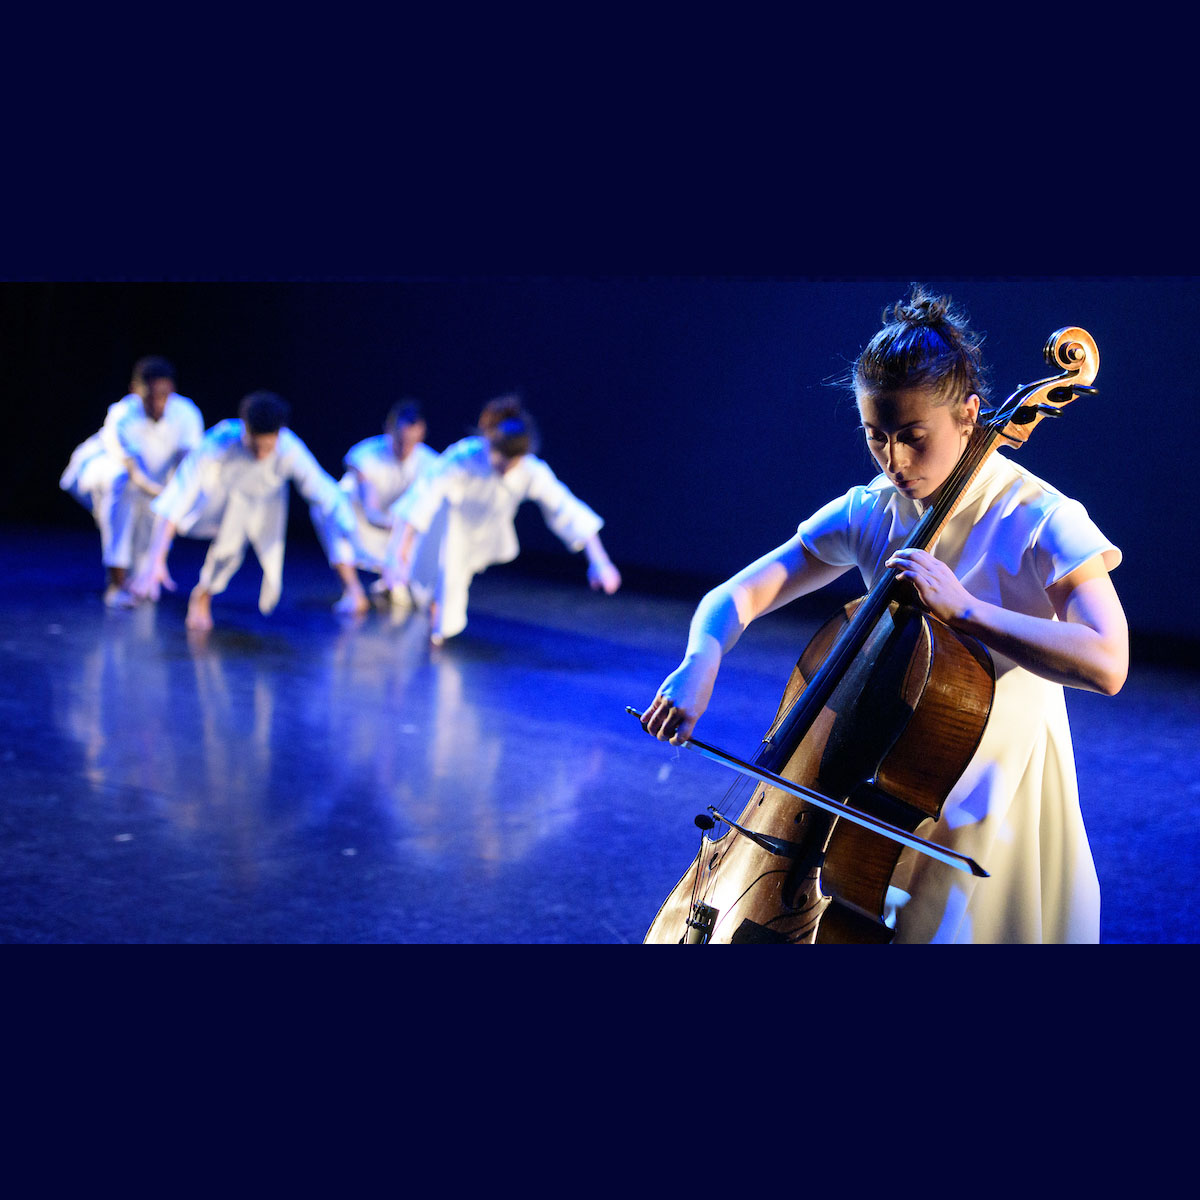 dancers approach a woman playing a cello